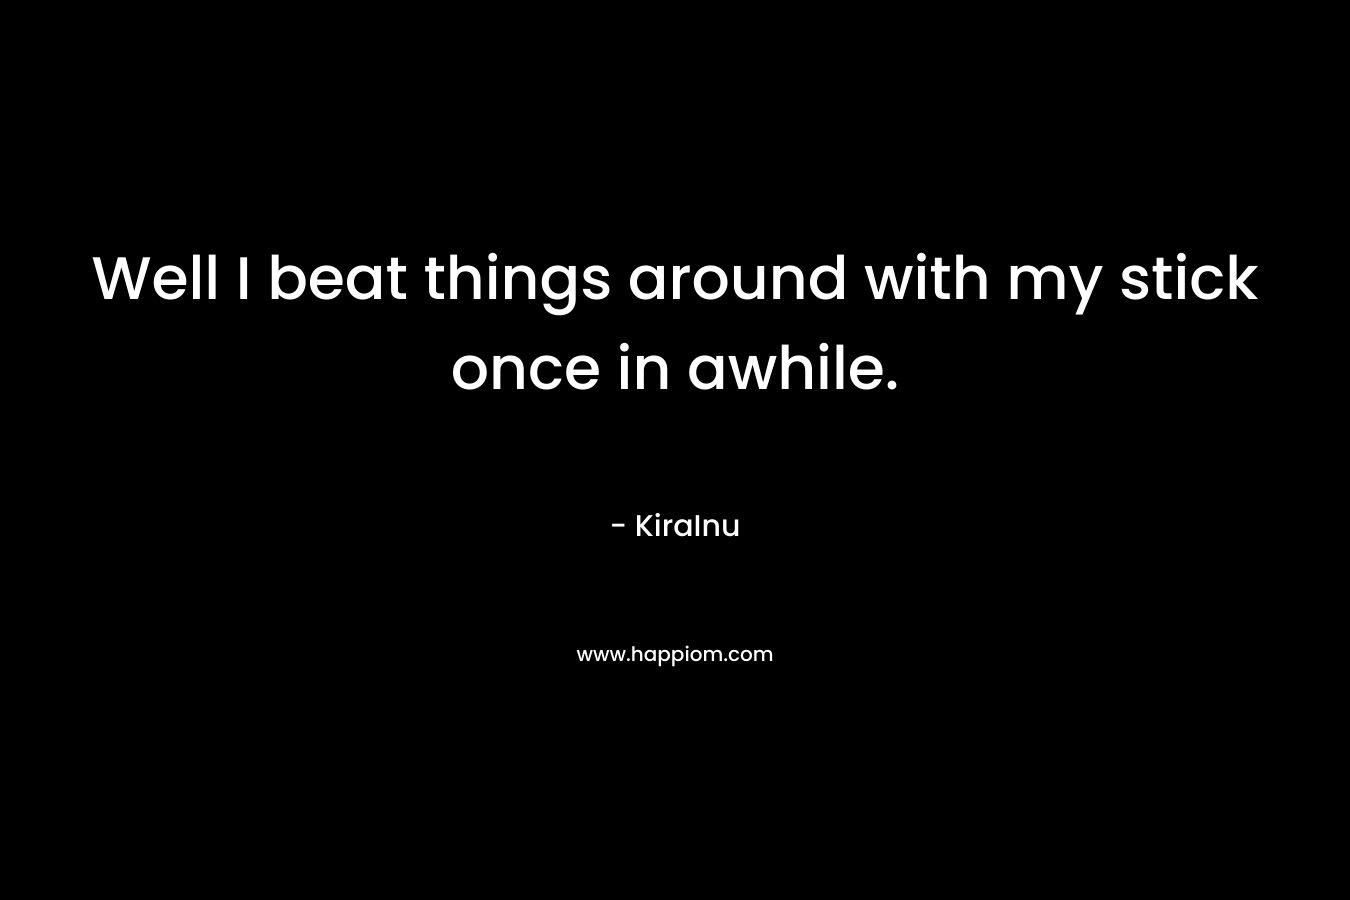 Well I beat things around with my stick once in awhile. – KiraInu